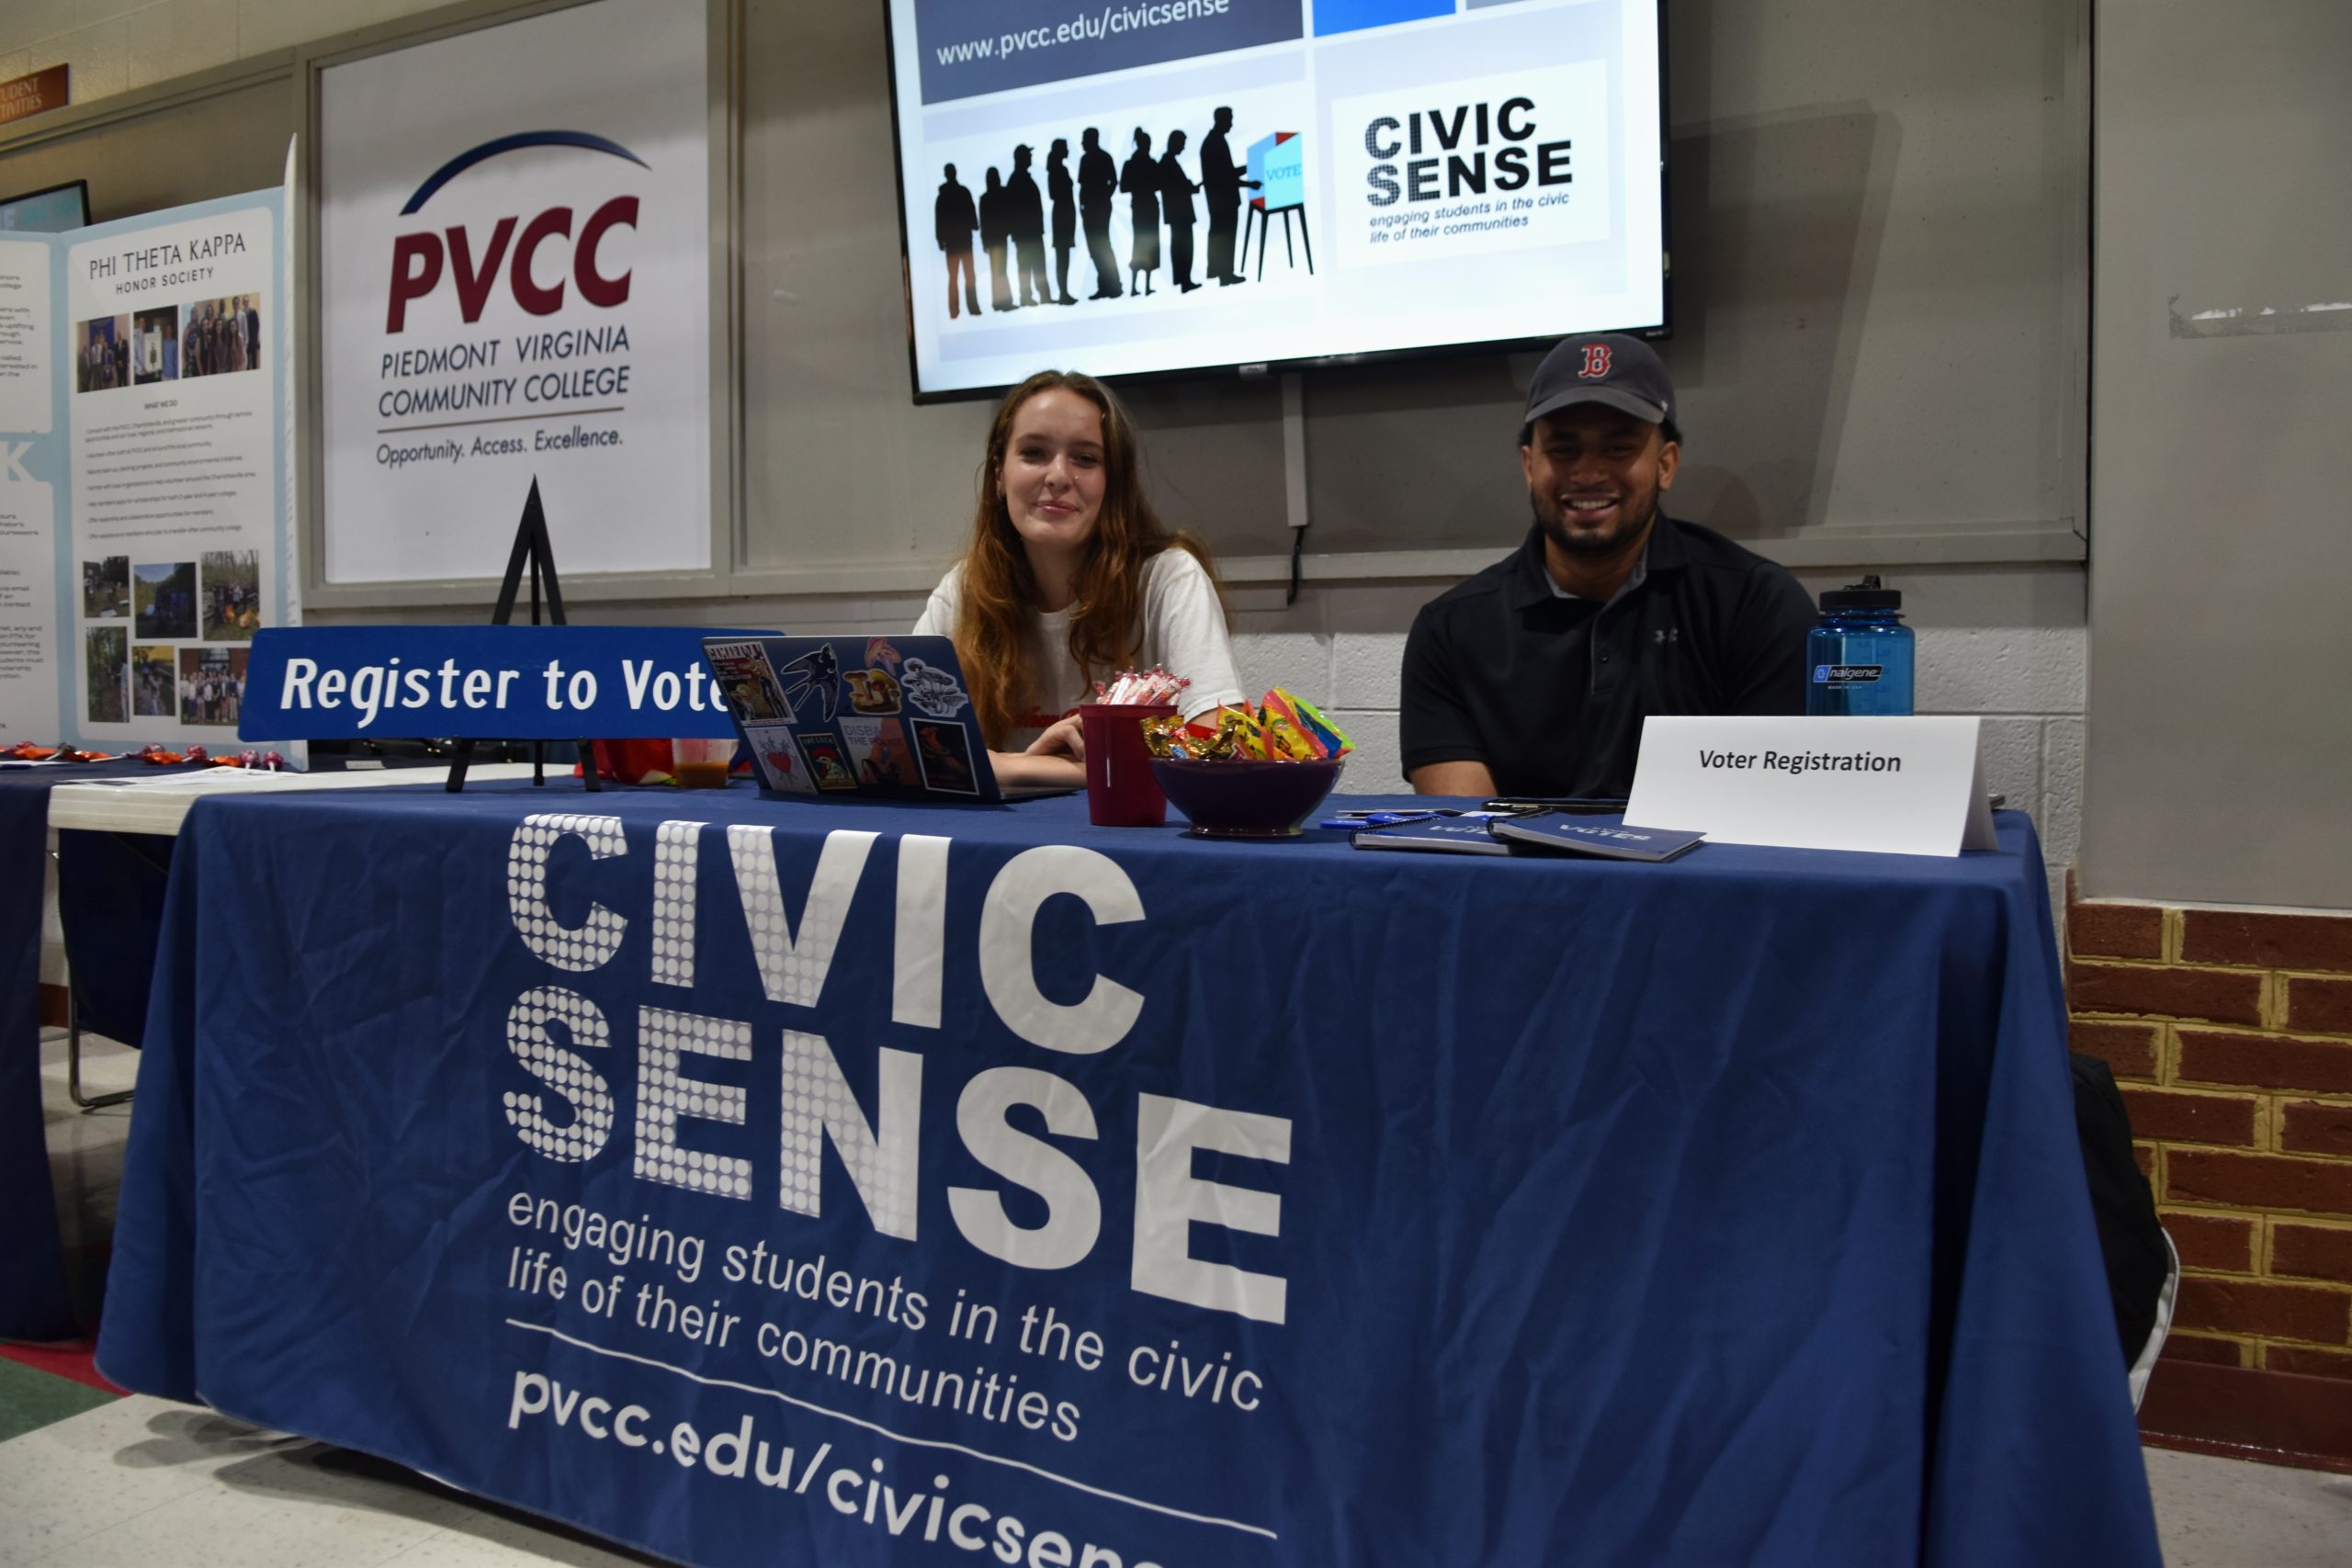 Students at PVCC encouraging other students to register to vote by providing laptops.